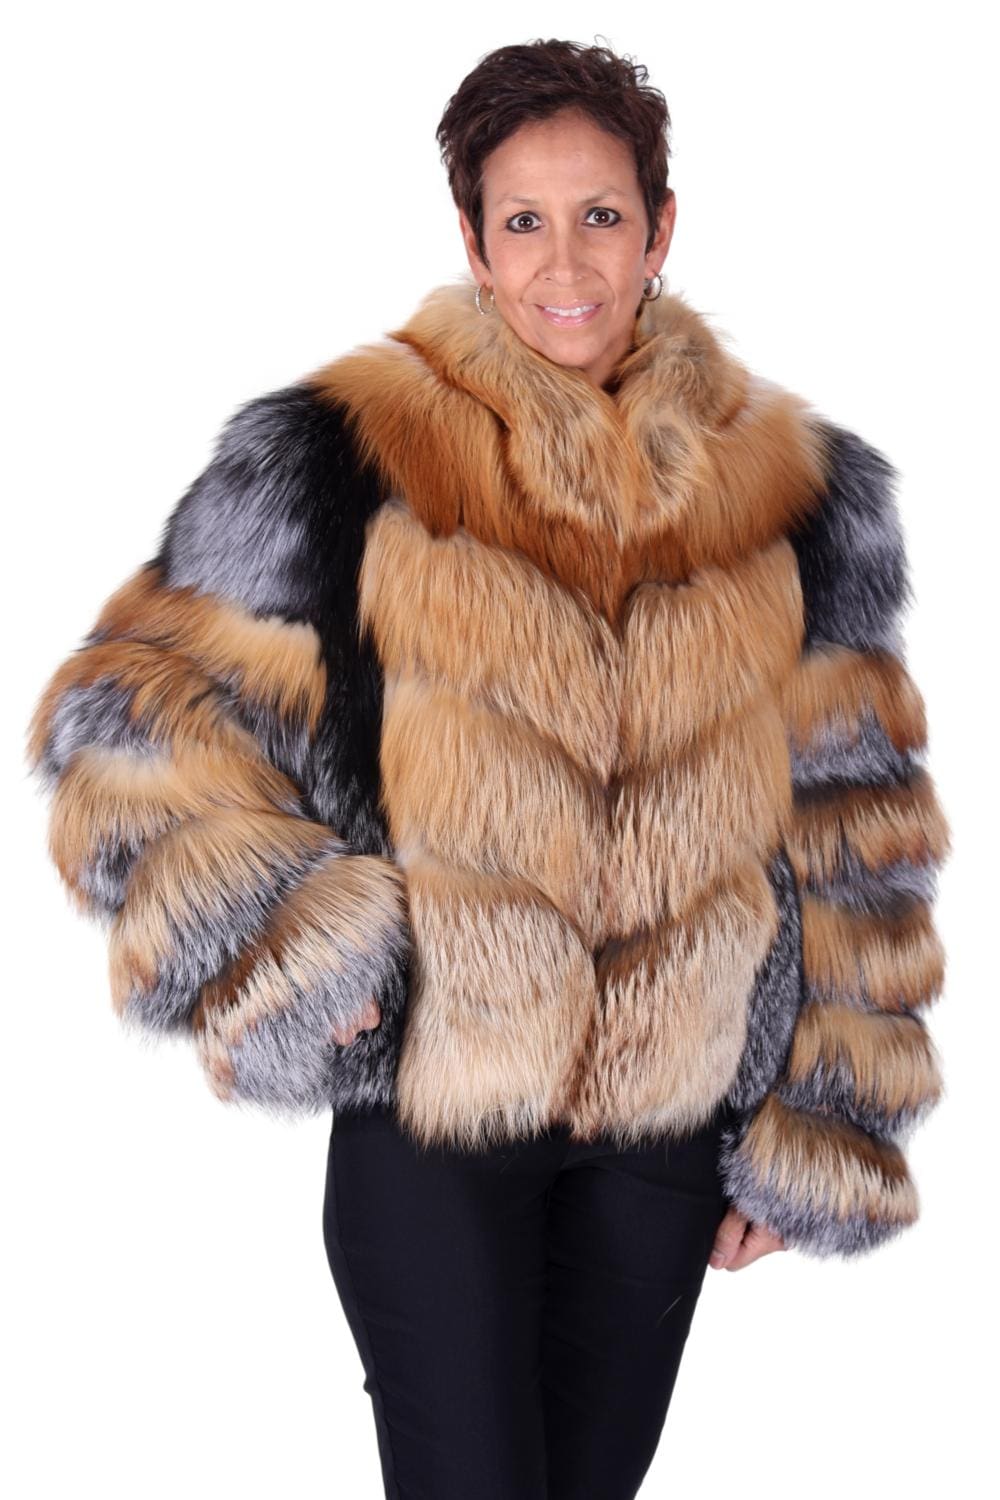 9 2 silver and red fox fur jacket Ugent Furs